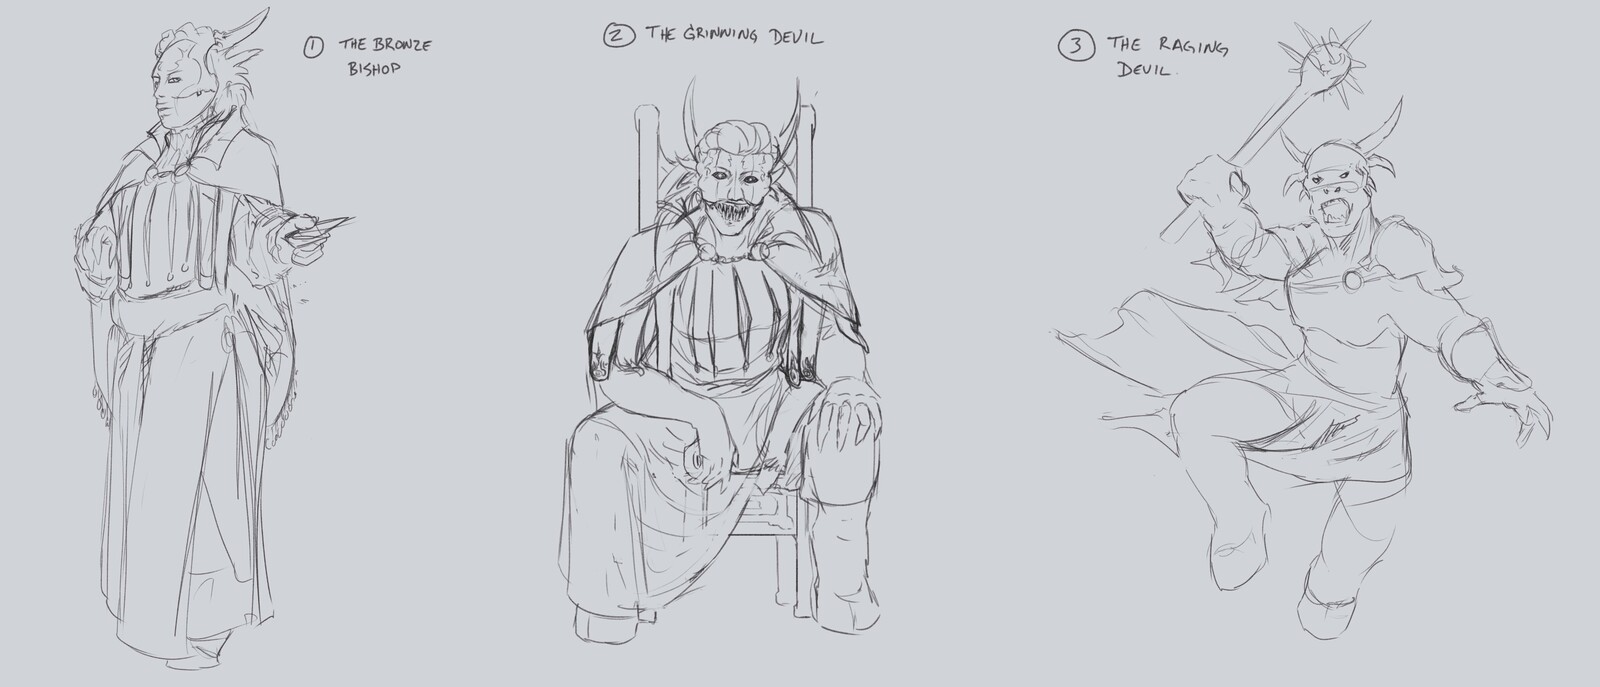 Concept sketches showing Bael fully masked as the Bronze Bishop, revealing himself as the arch-devil and then fully unmasked.